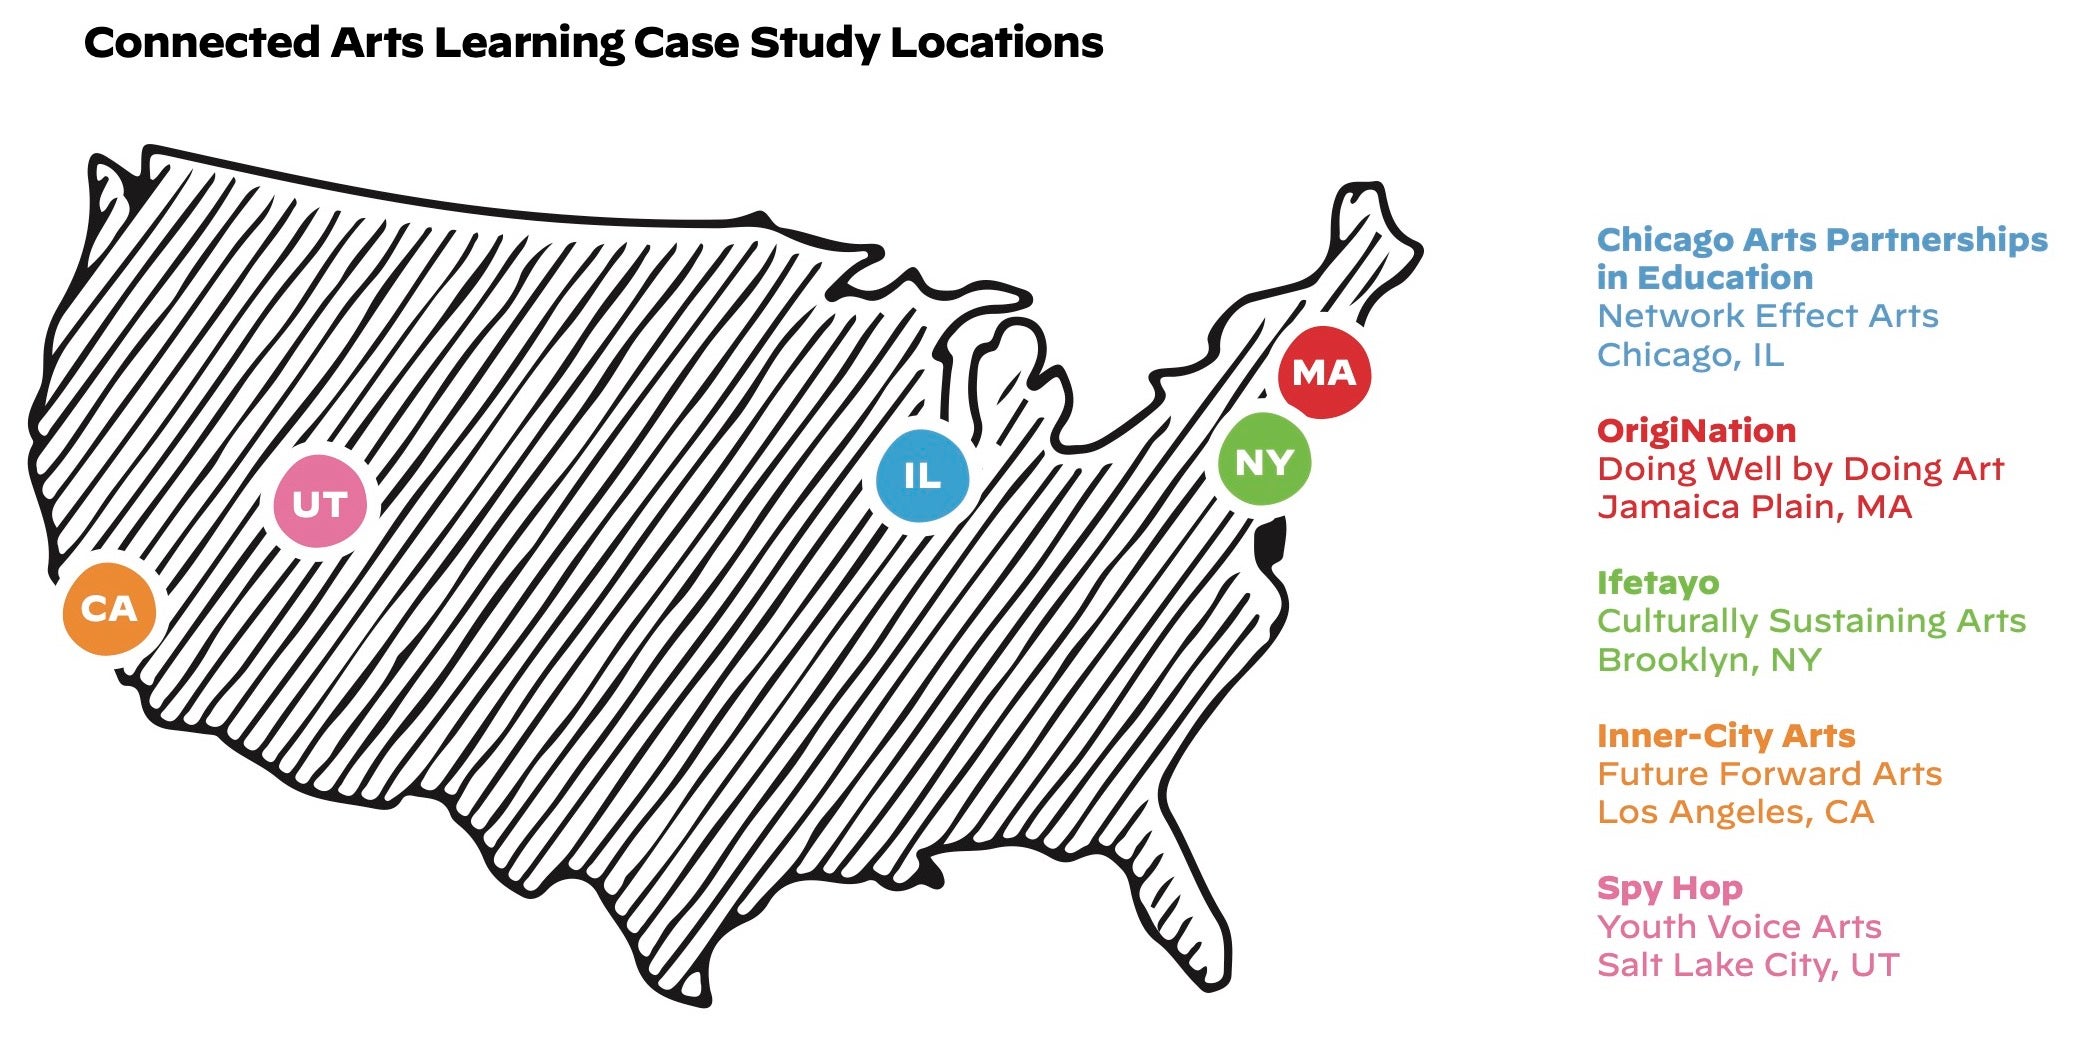 Connected Arts Learning Case Study Locations